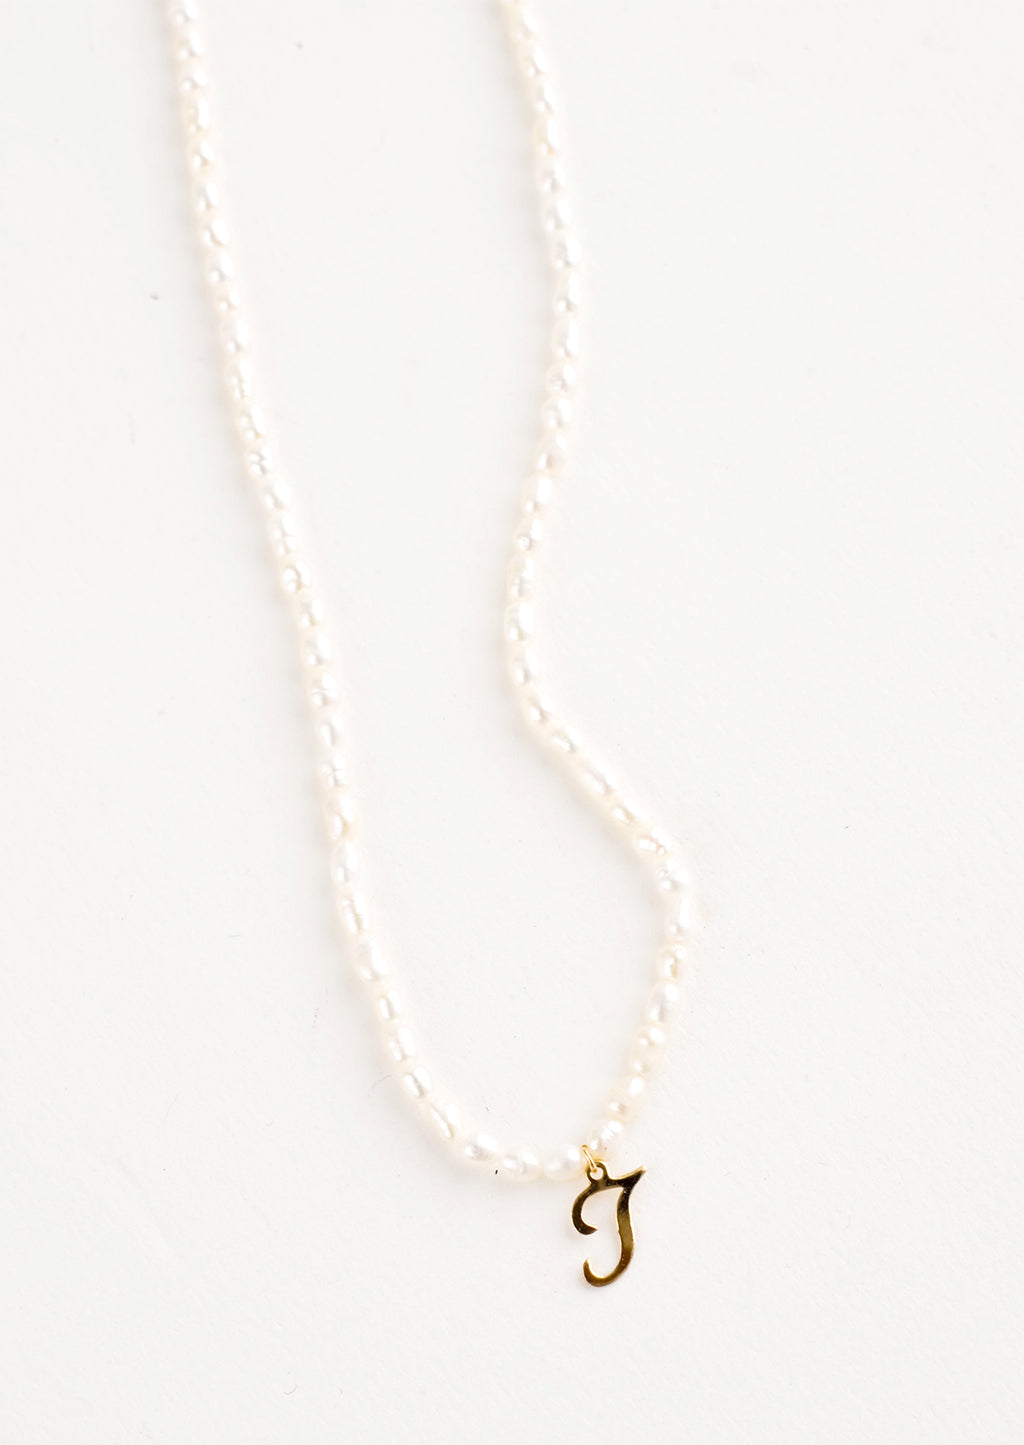 J: Quincy Pearl Initial Necklace